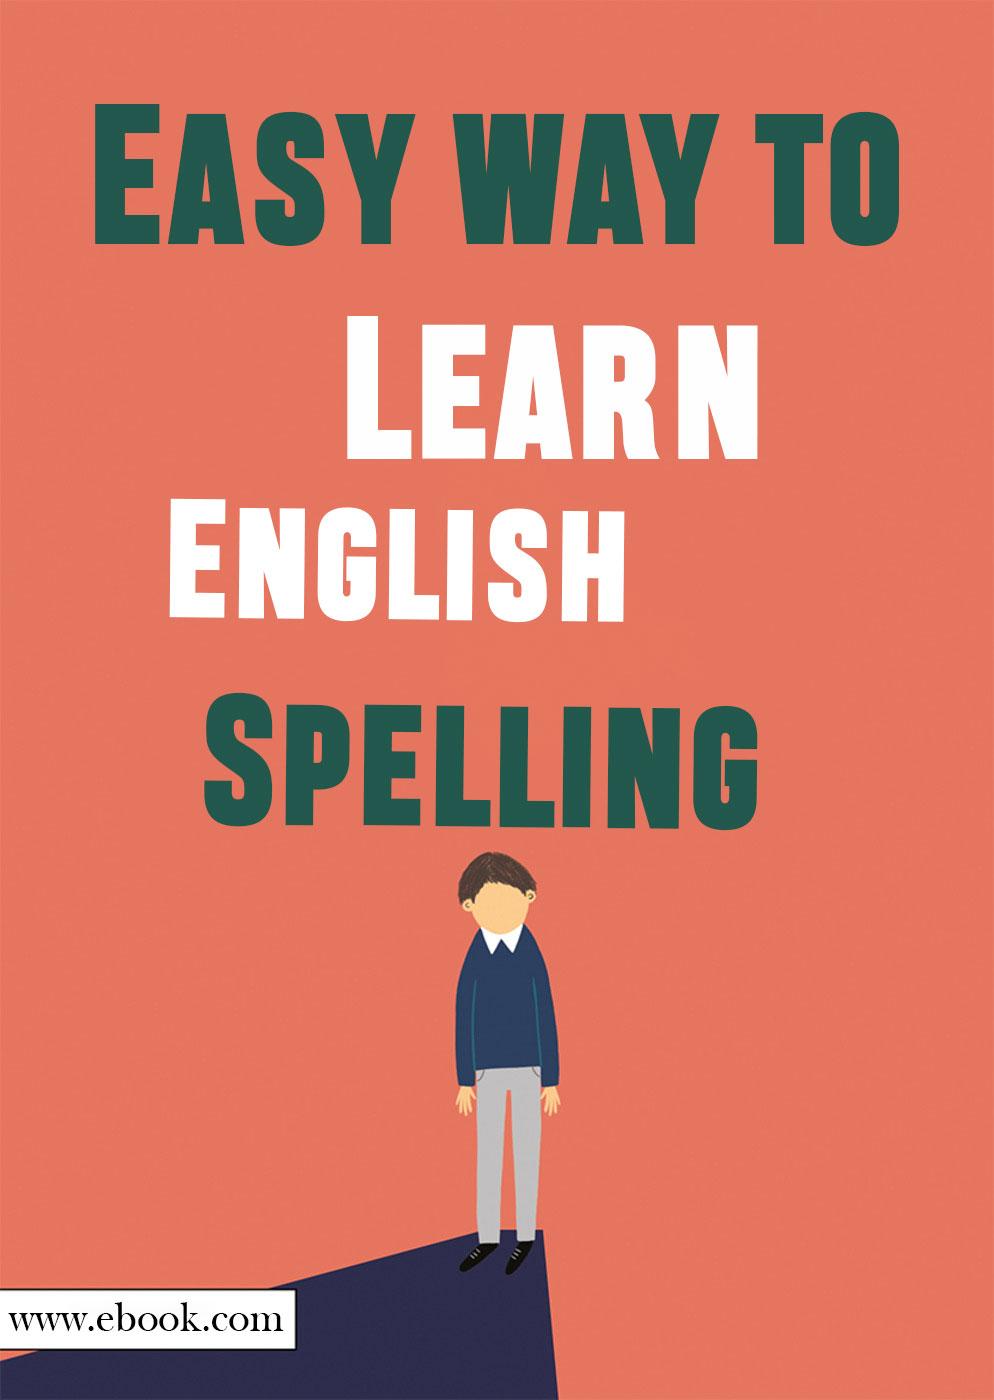 Easy way to Learn English Spelling - Easy way to Learn English Spelling